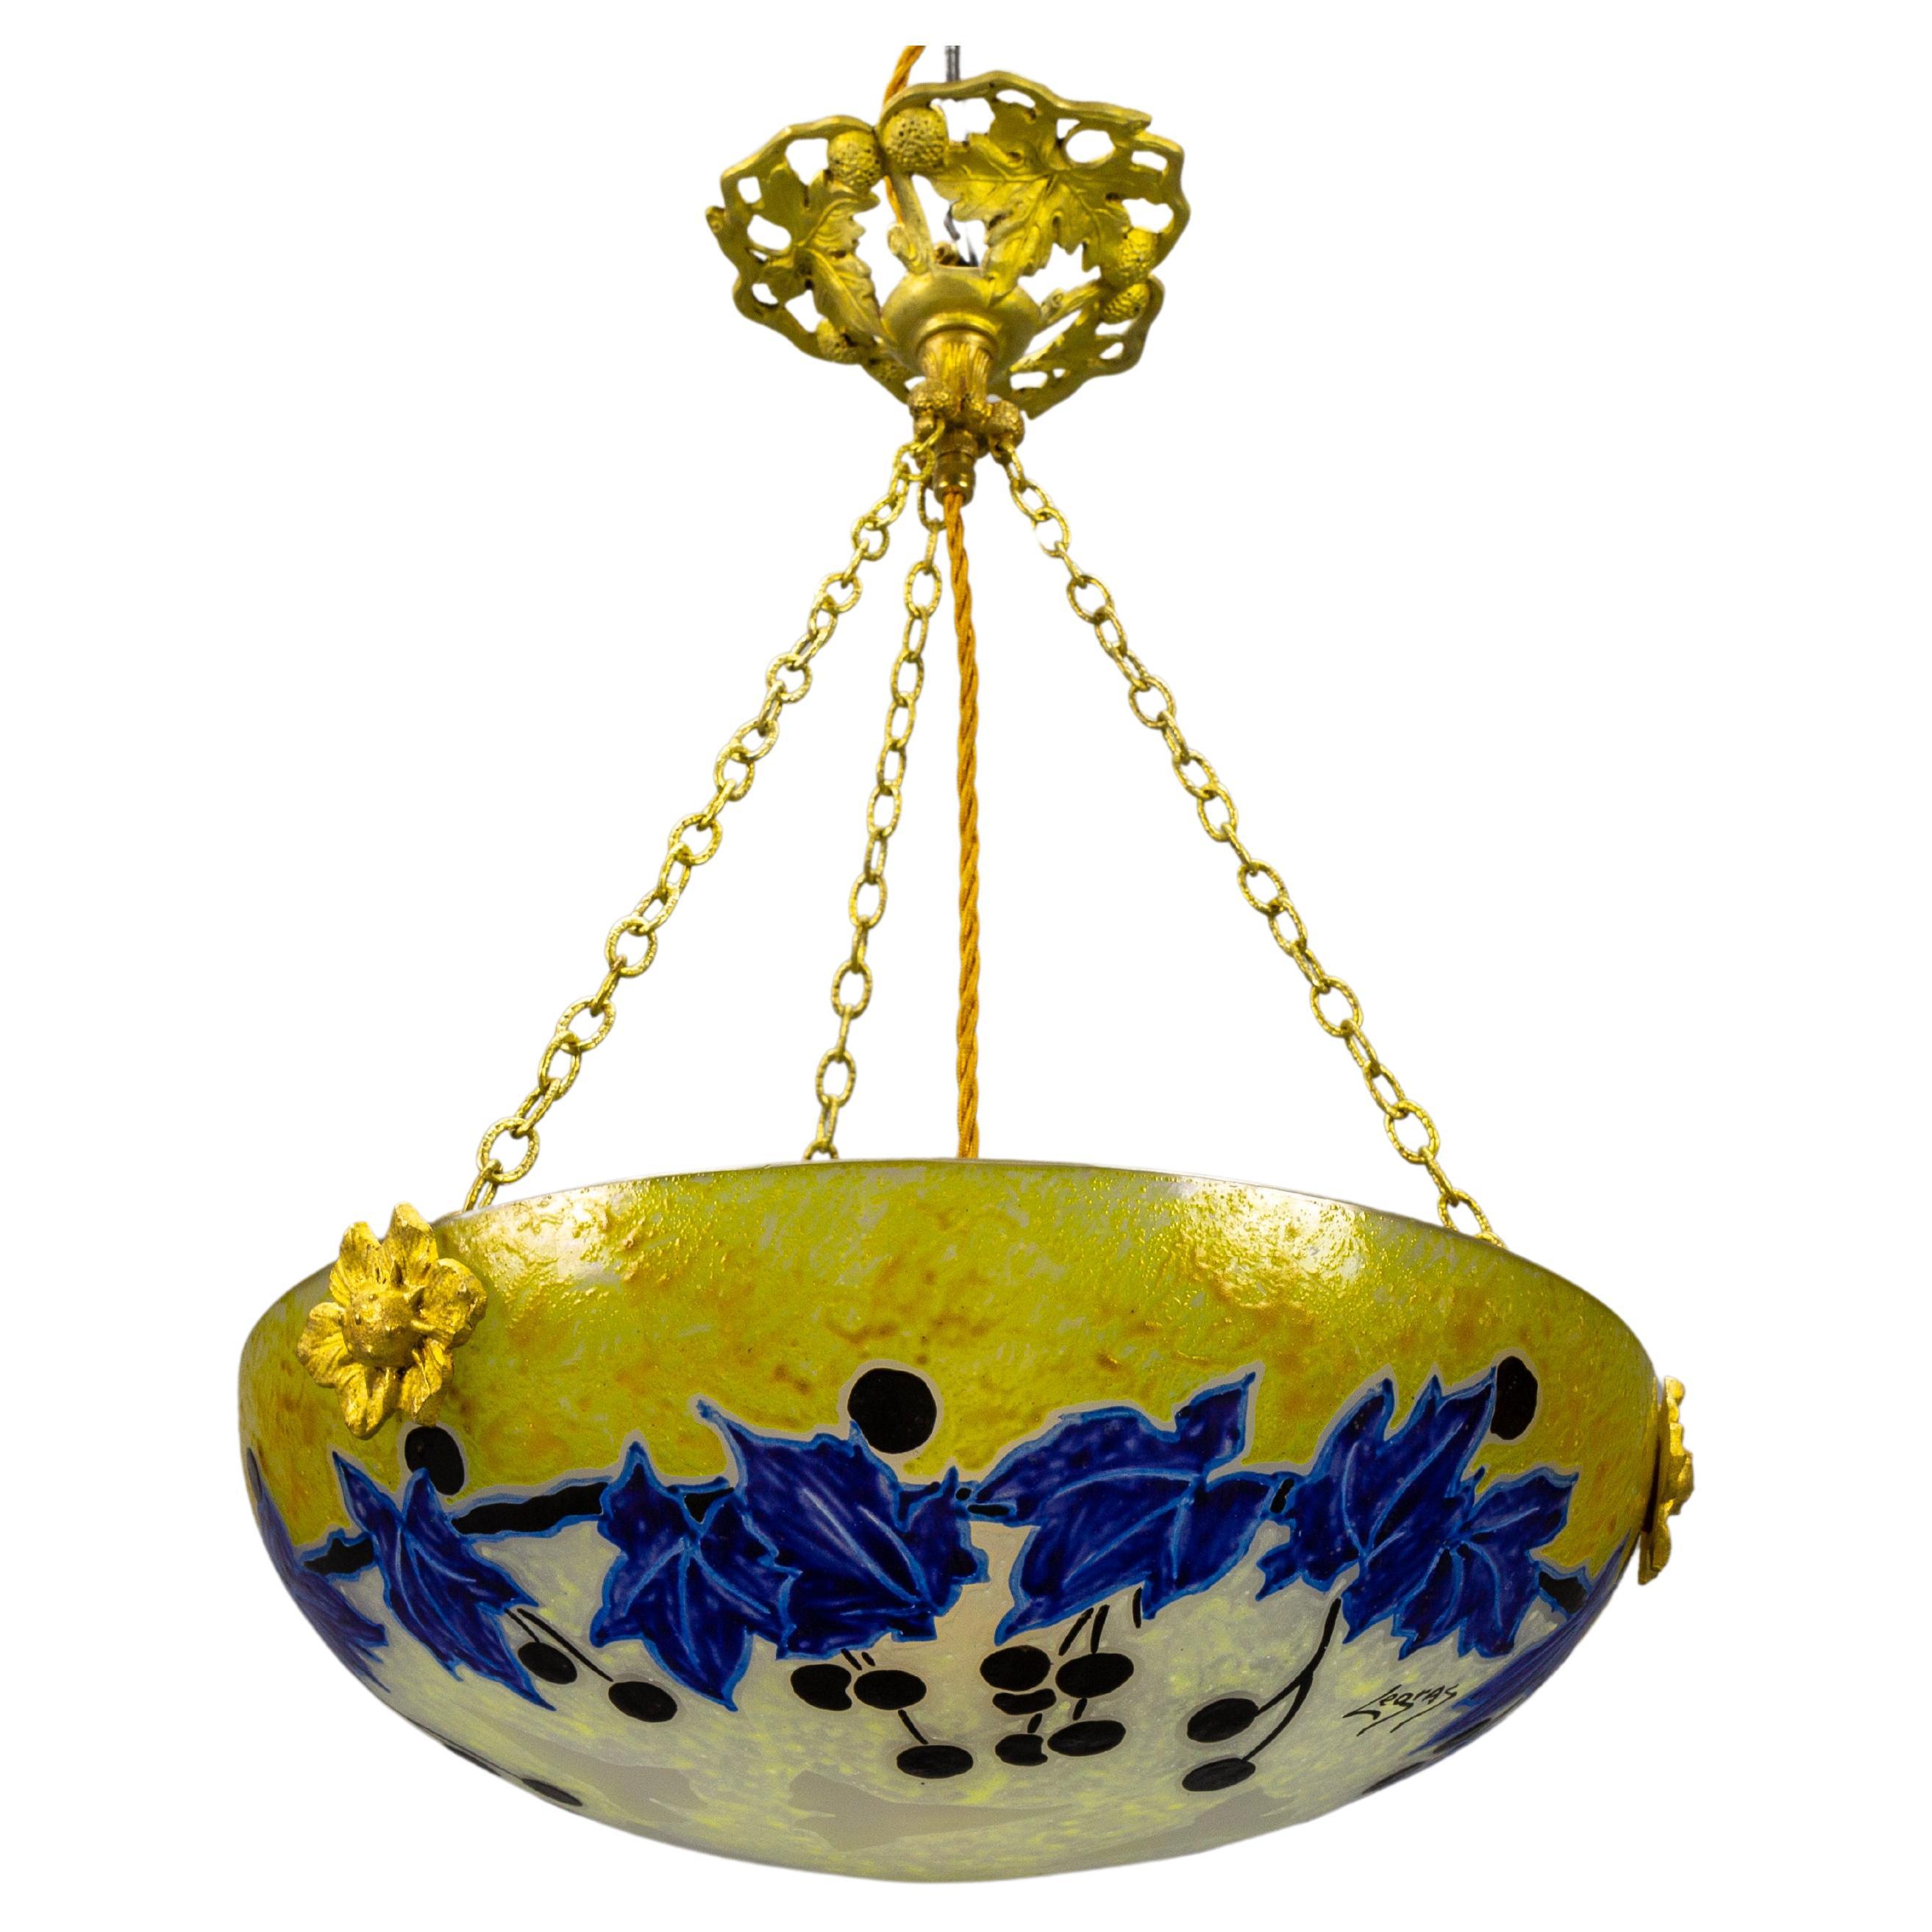 French Art Nouveau Pendant Light with Yellow and Blue Glass Ivy Motifs by Legras